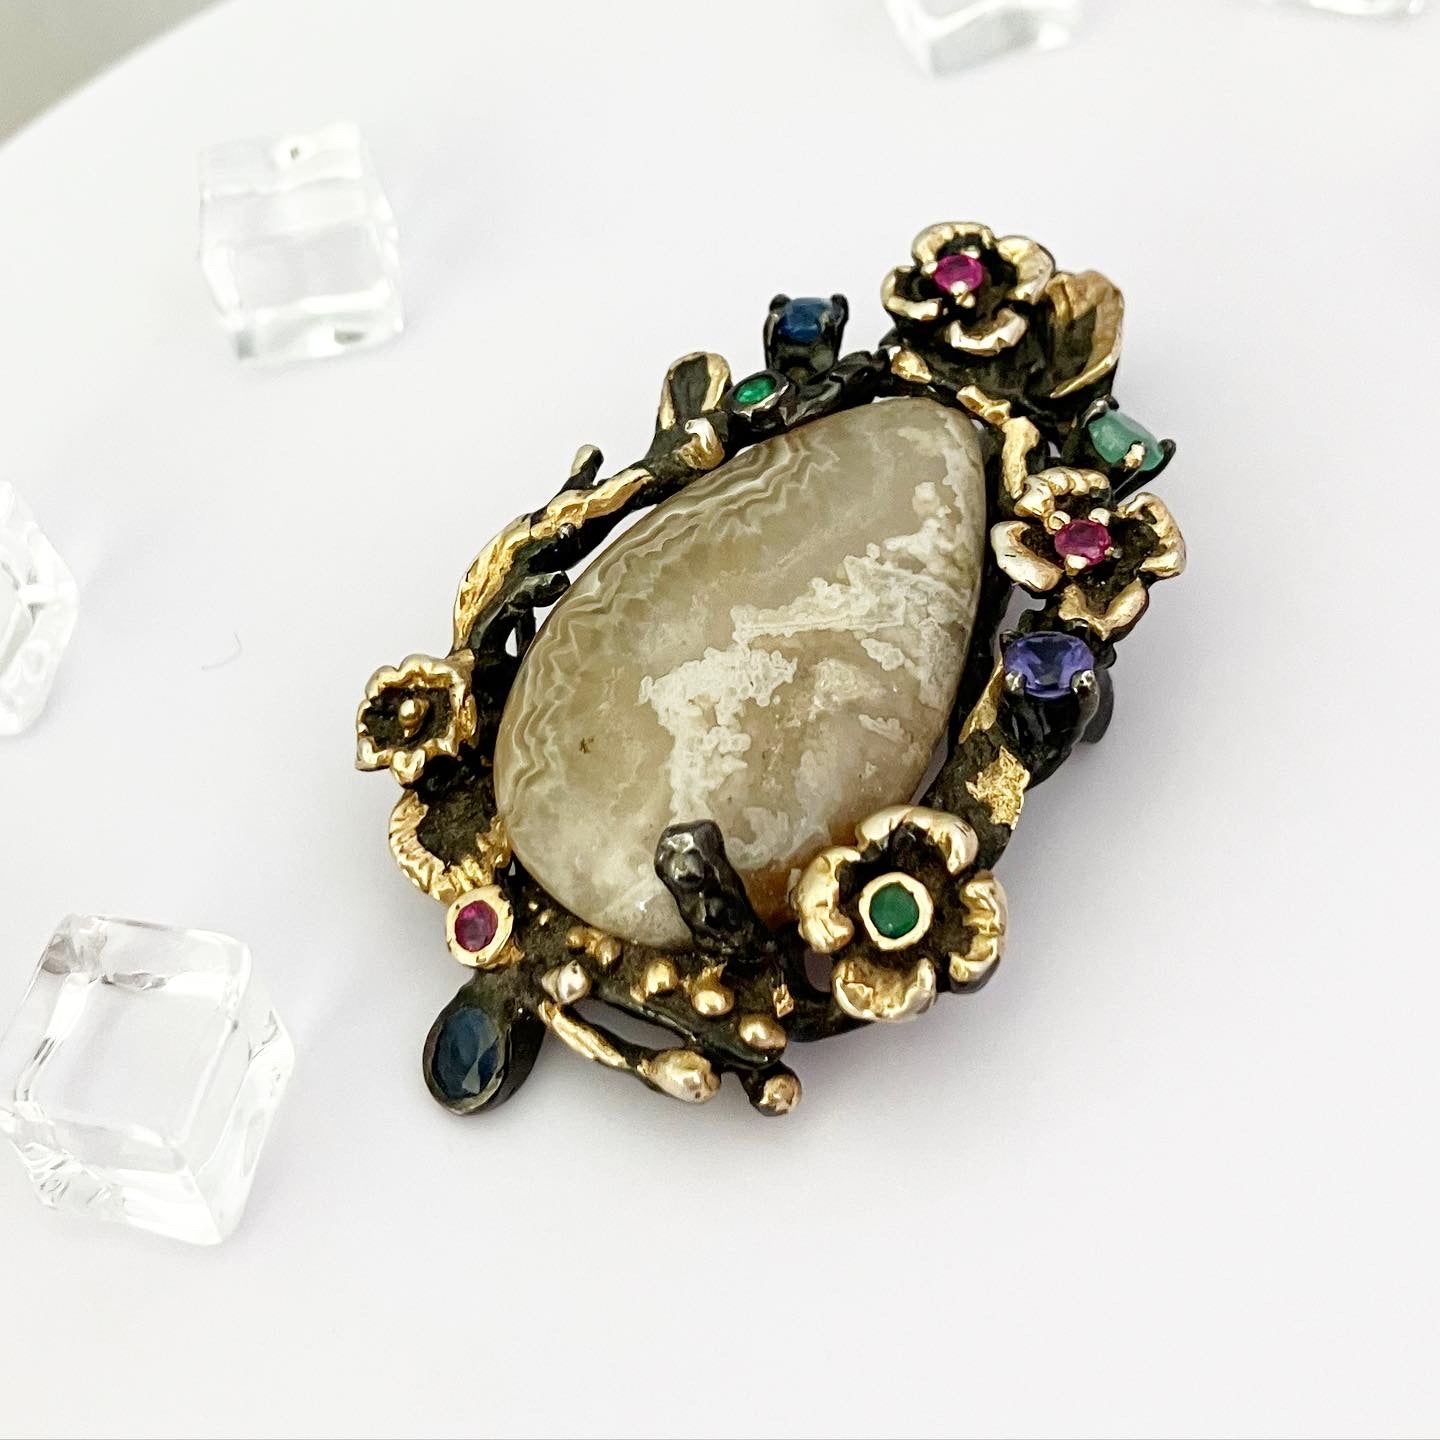 Brooch pendant in blackened silver with landscape agate and ruby, chrysolite and tonsilite.